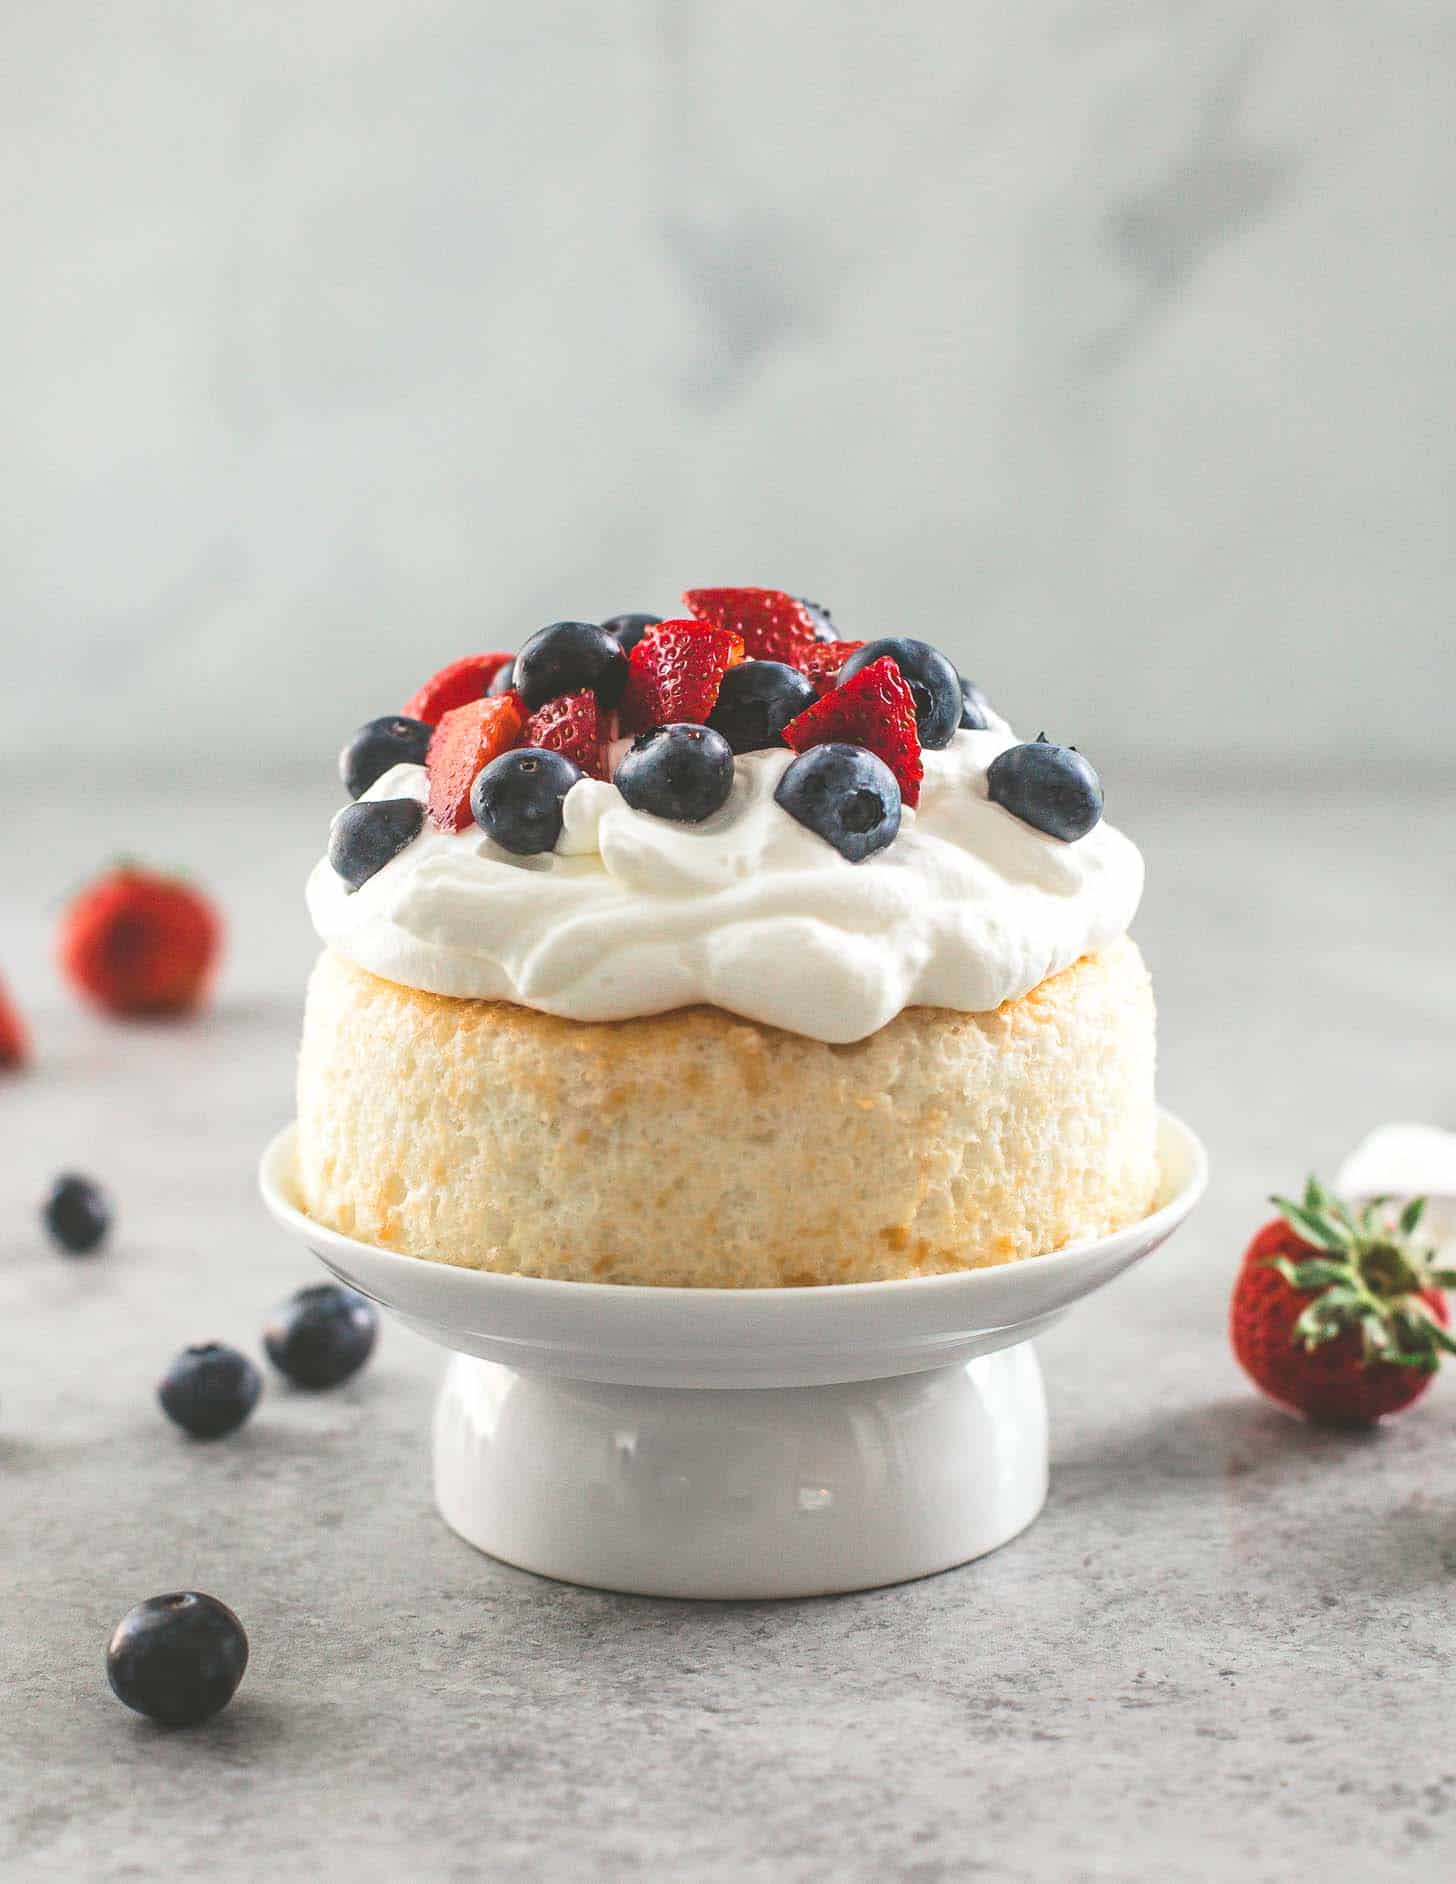 smash cake topped with whipped cream and berries